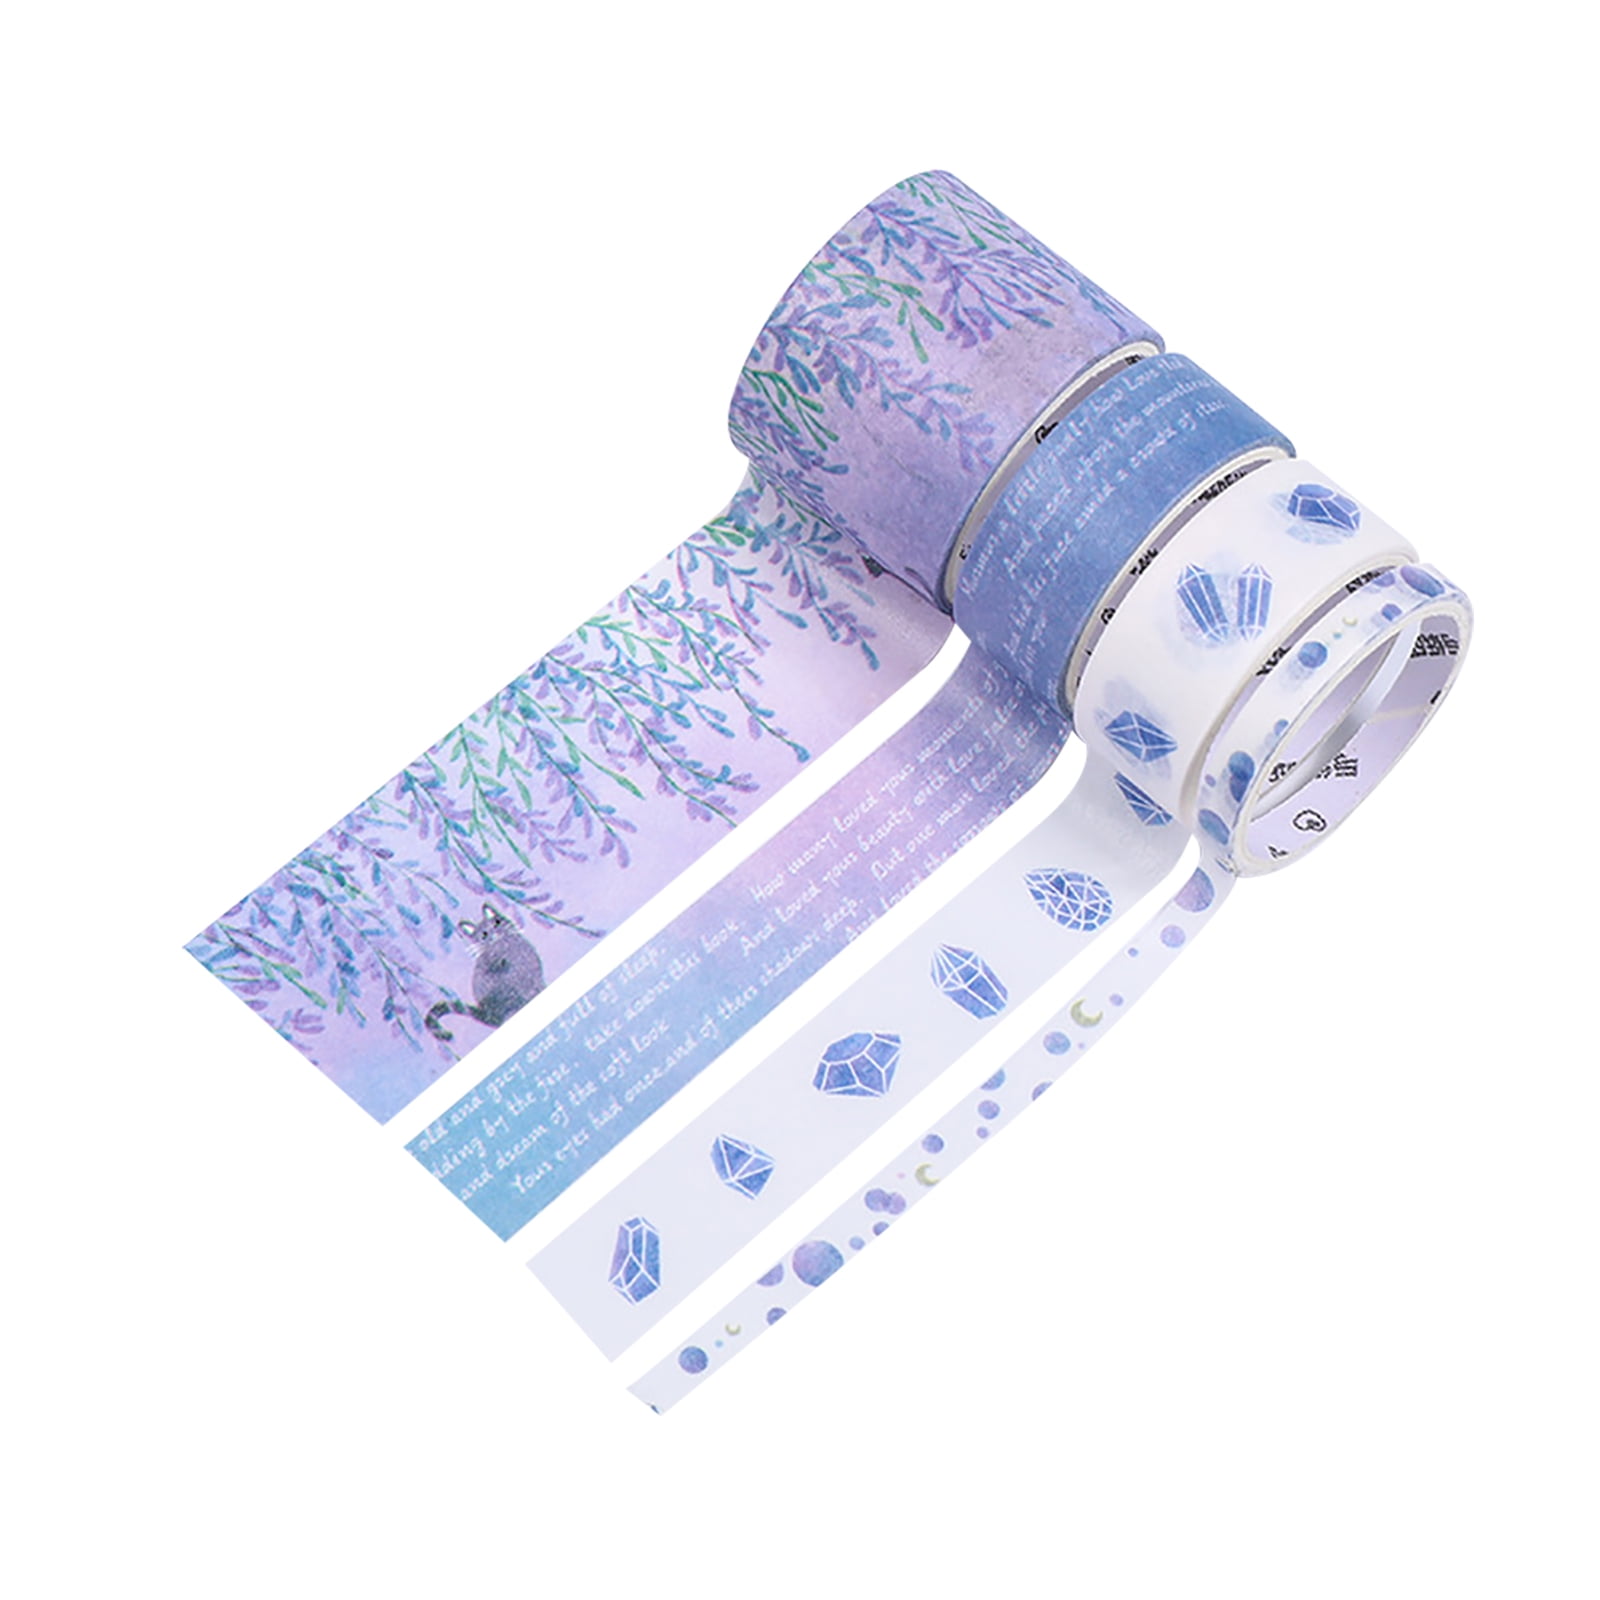 Scotch Expressions Washi Crafting Tape: 0.59 in. x 393 in. (Pink Cupcakes)